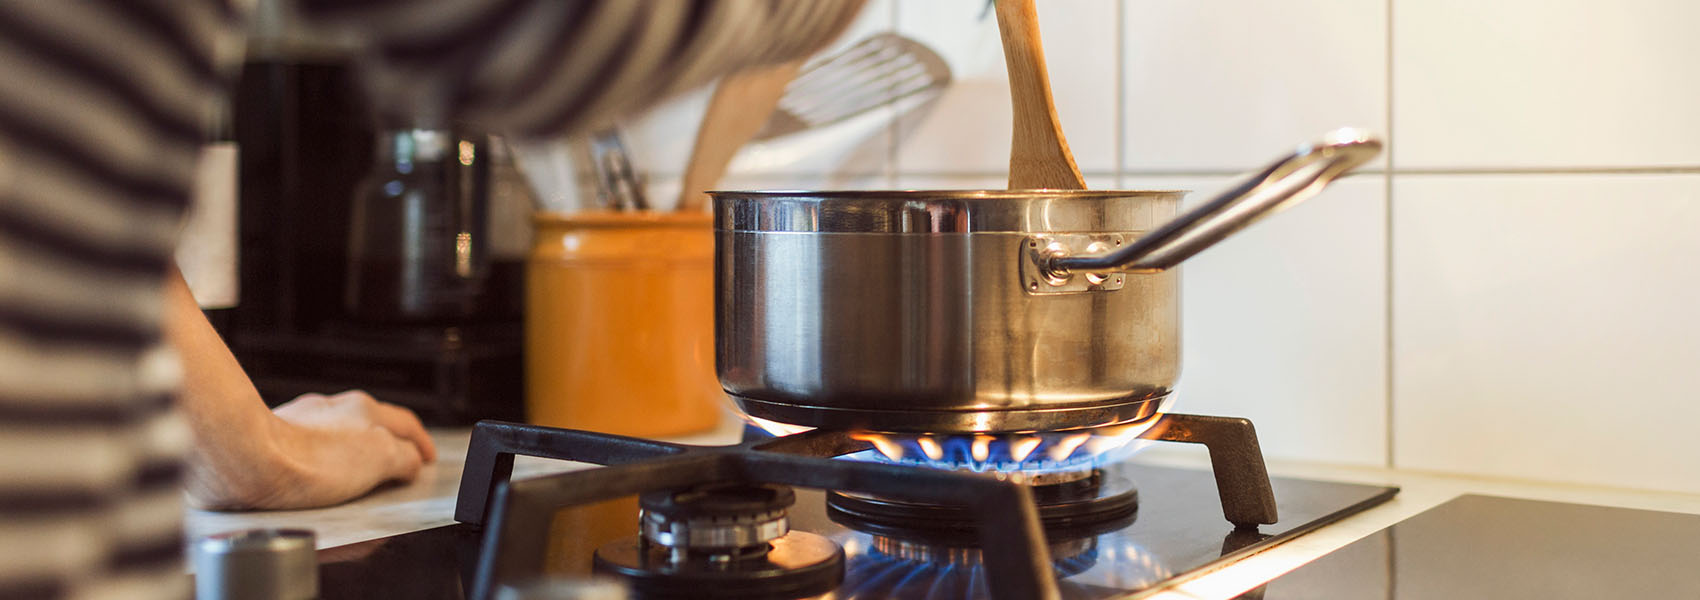 cooking on a gas stove